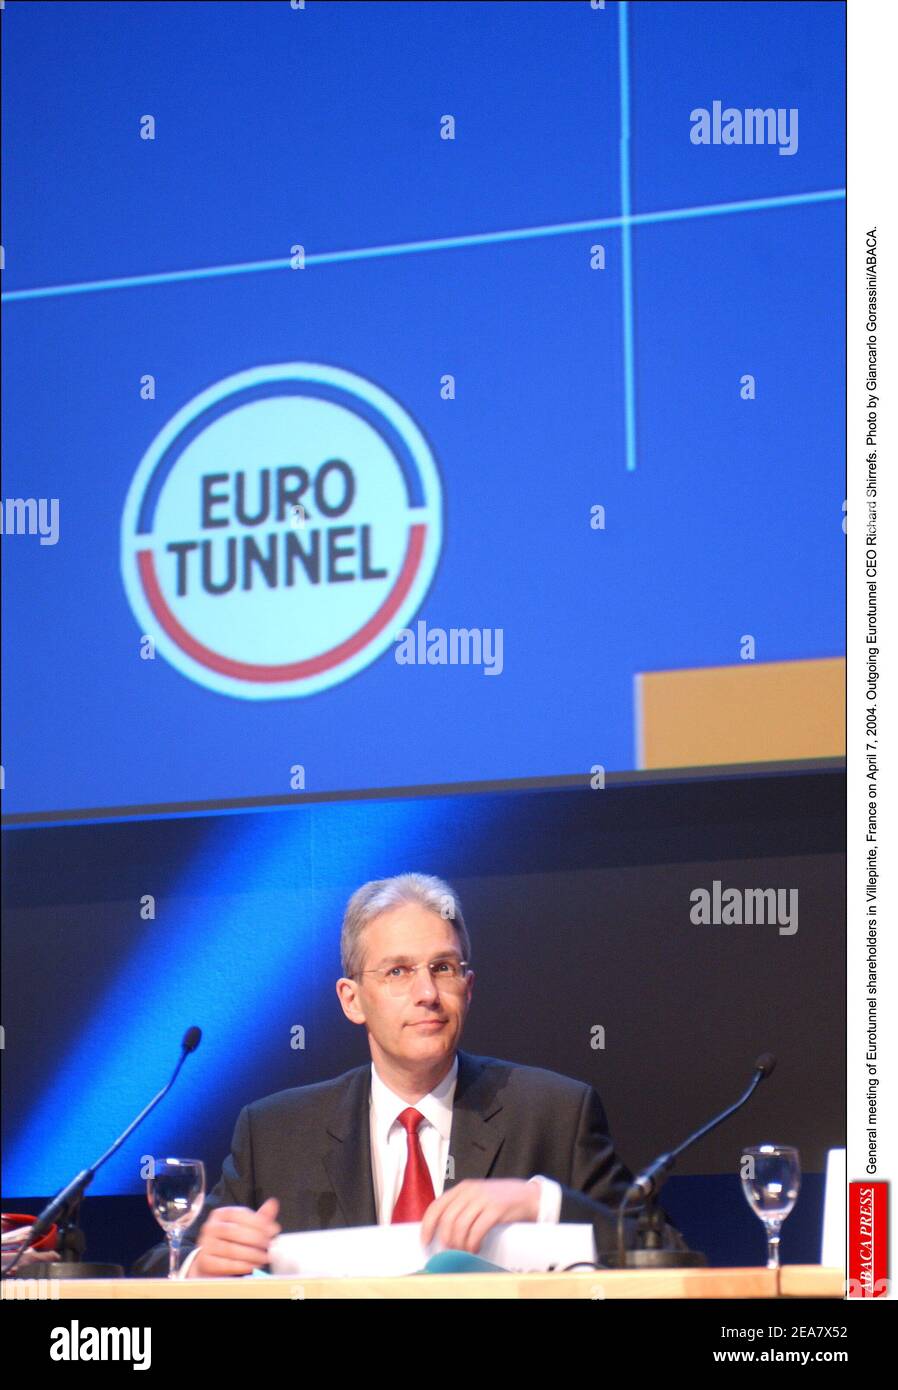 General meeting of Eurotunnel shareholders in Villepinte, France on April 7, 2004. Outgoing Eurotunnel CEO Richard Shirrefs. Photo by Giancarlo Gorassini/ABACA. Stock Photo